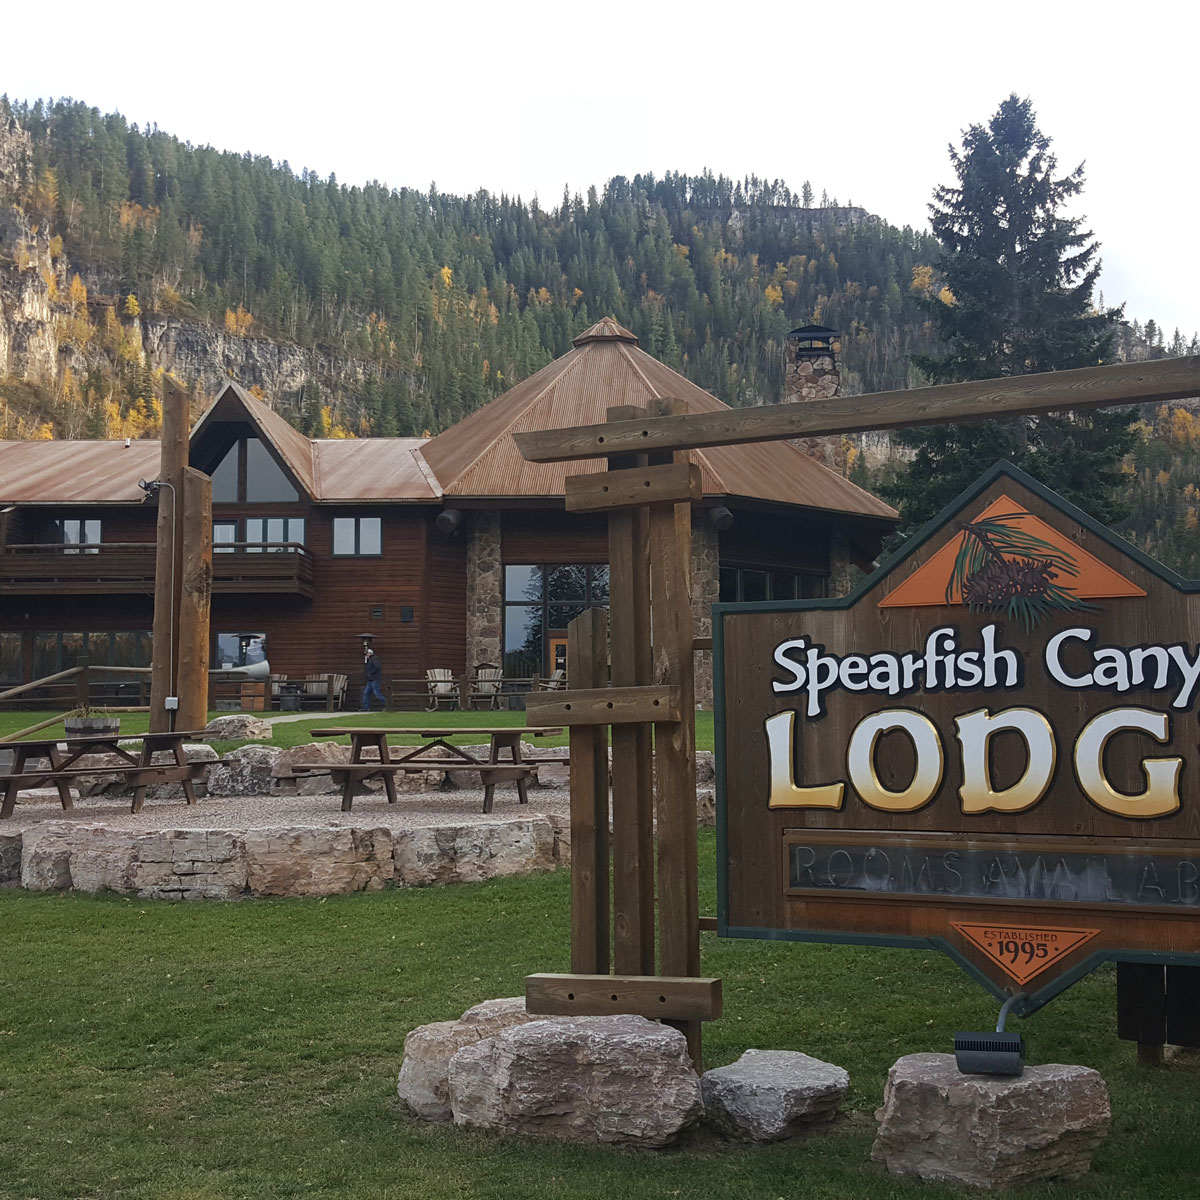 The warm, rustic wood exterior of Spearfish Canyon Lodge and the sign in front of it invites visitors in as Spearfish Canyon walls overlook in the distance.